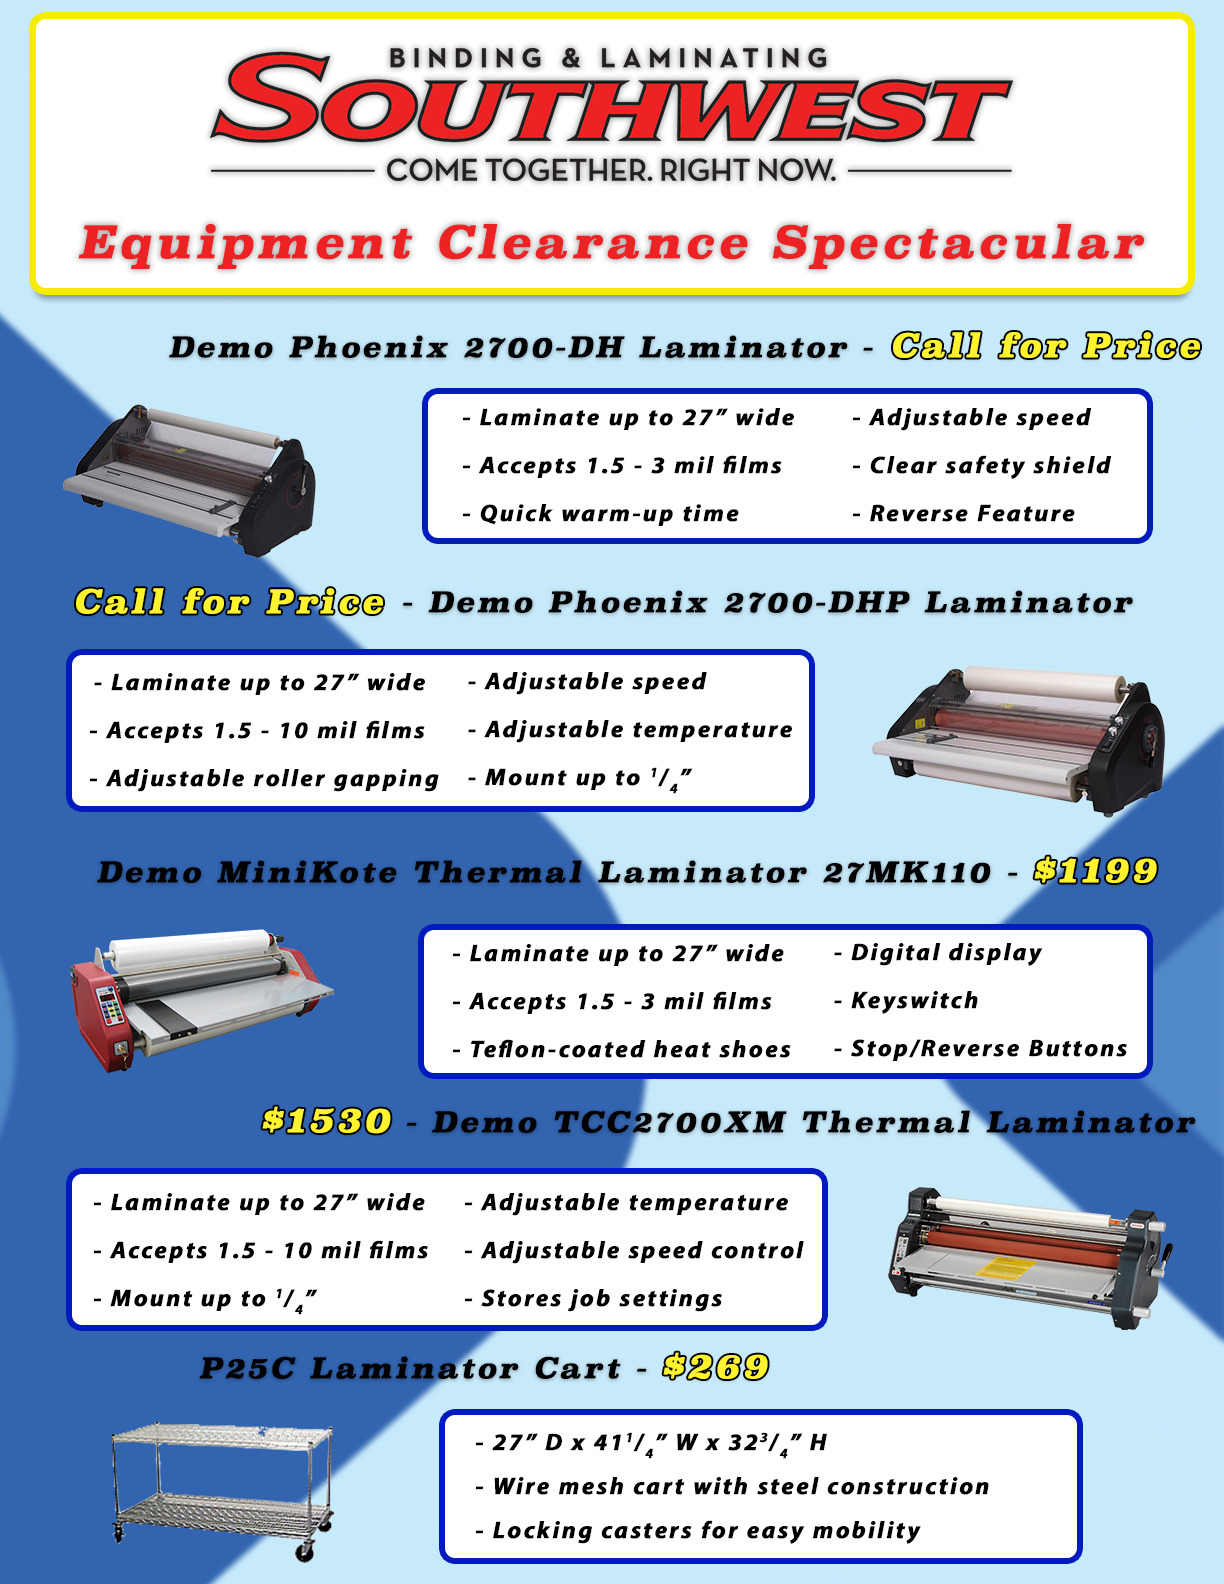 Equipment Clearance Spectacular